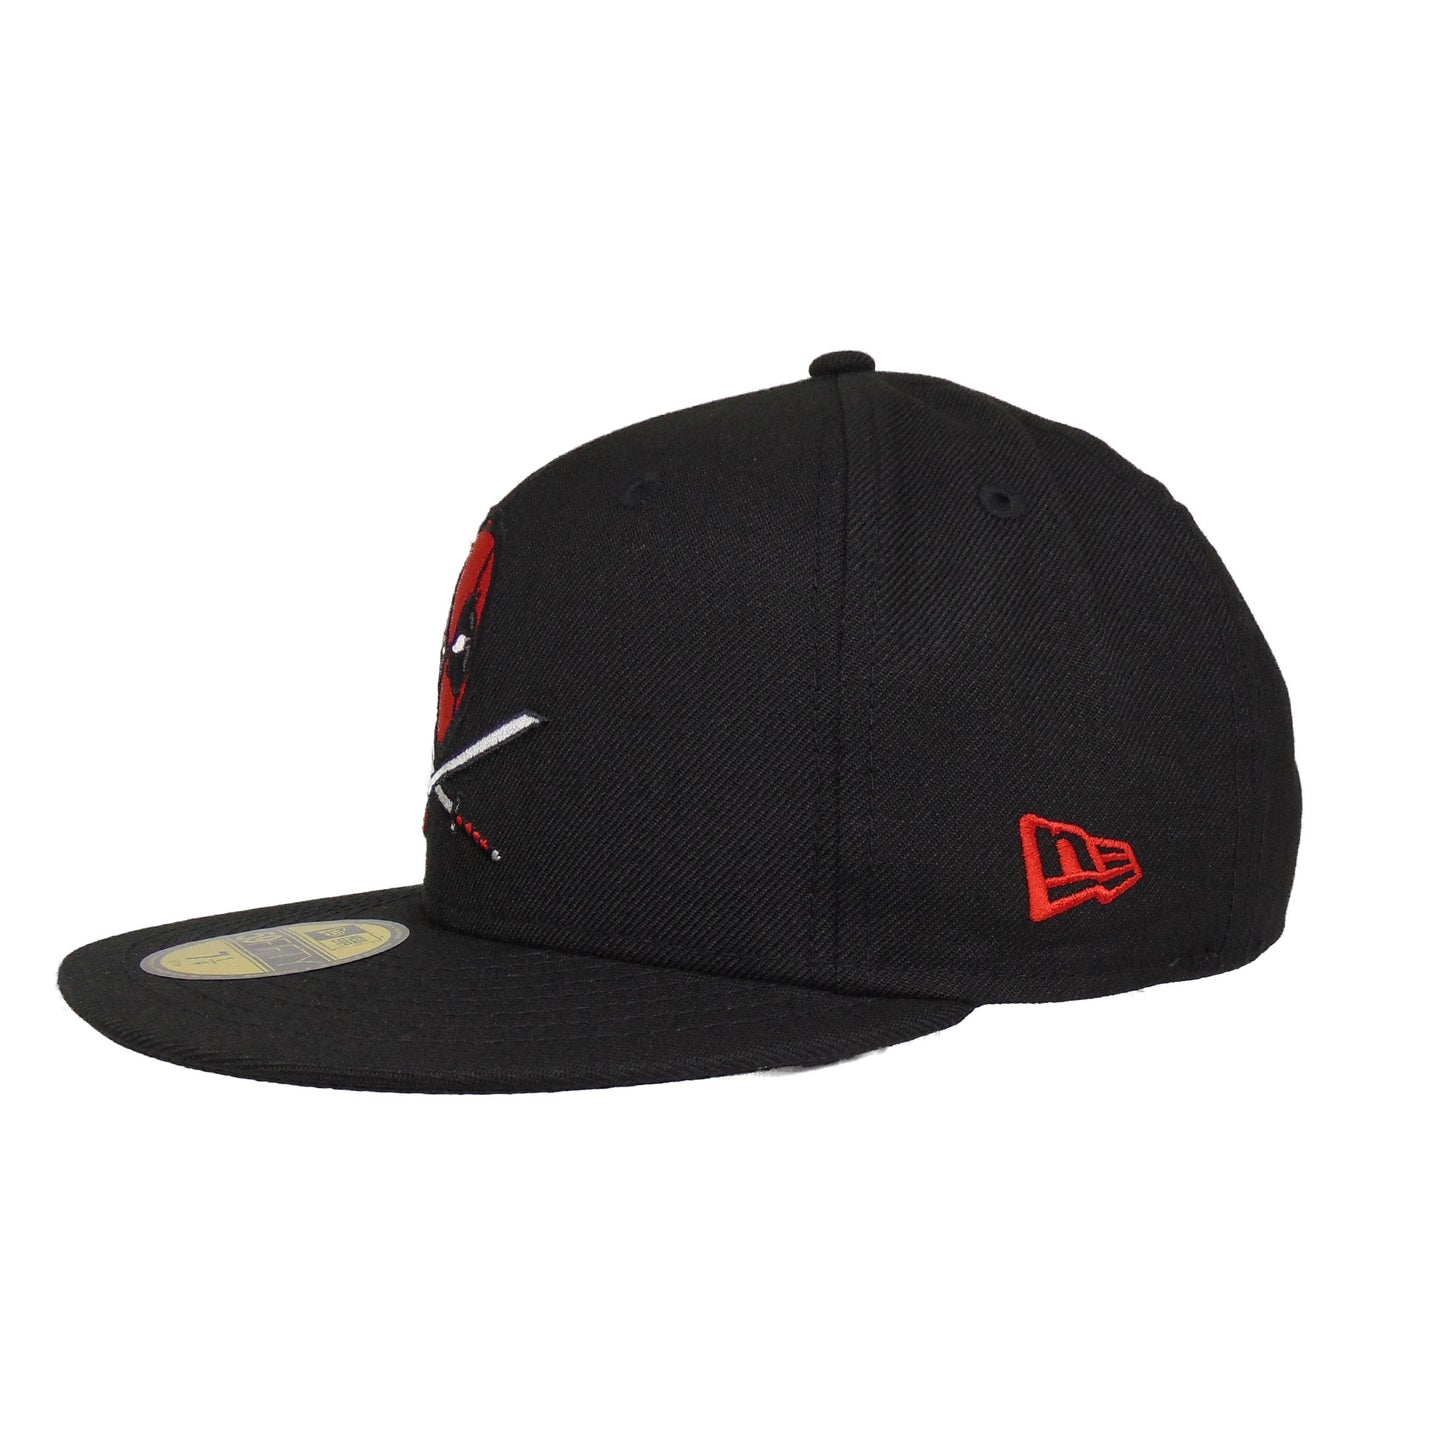 Marvel Deadpool Justfitteds Exclusive New Era 59FIFTY Cap Black